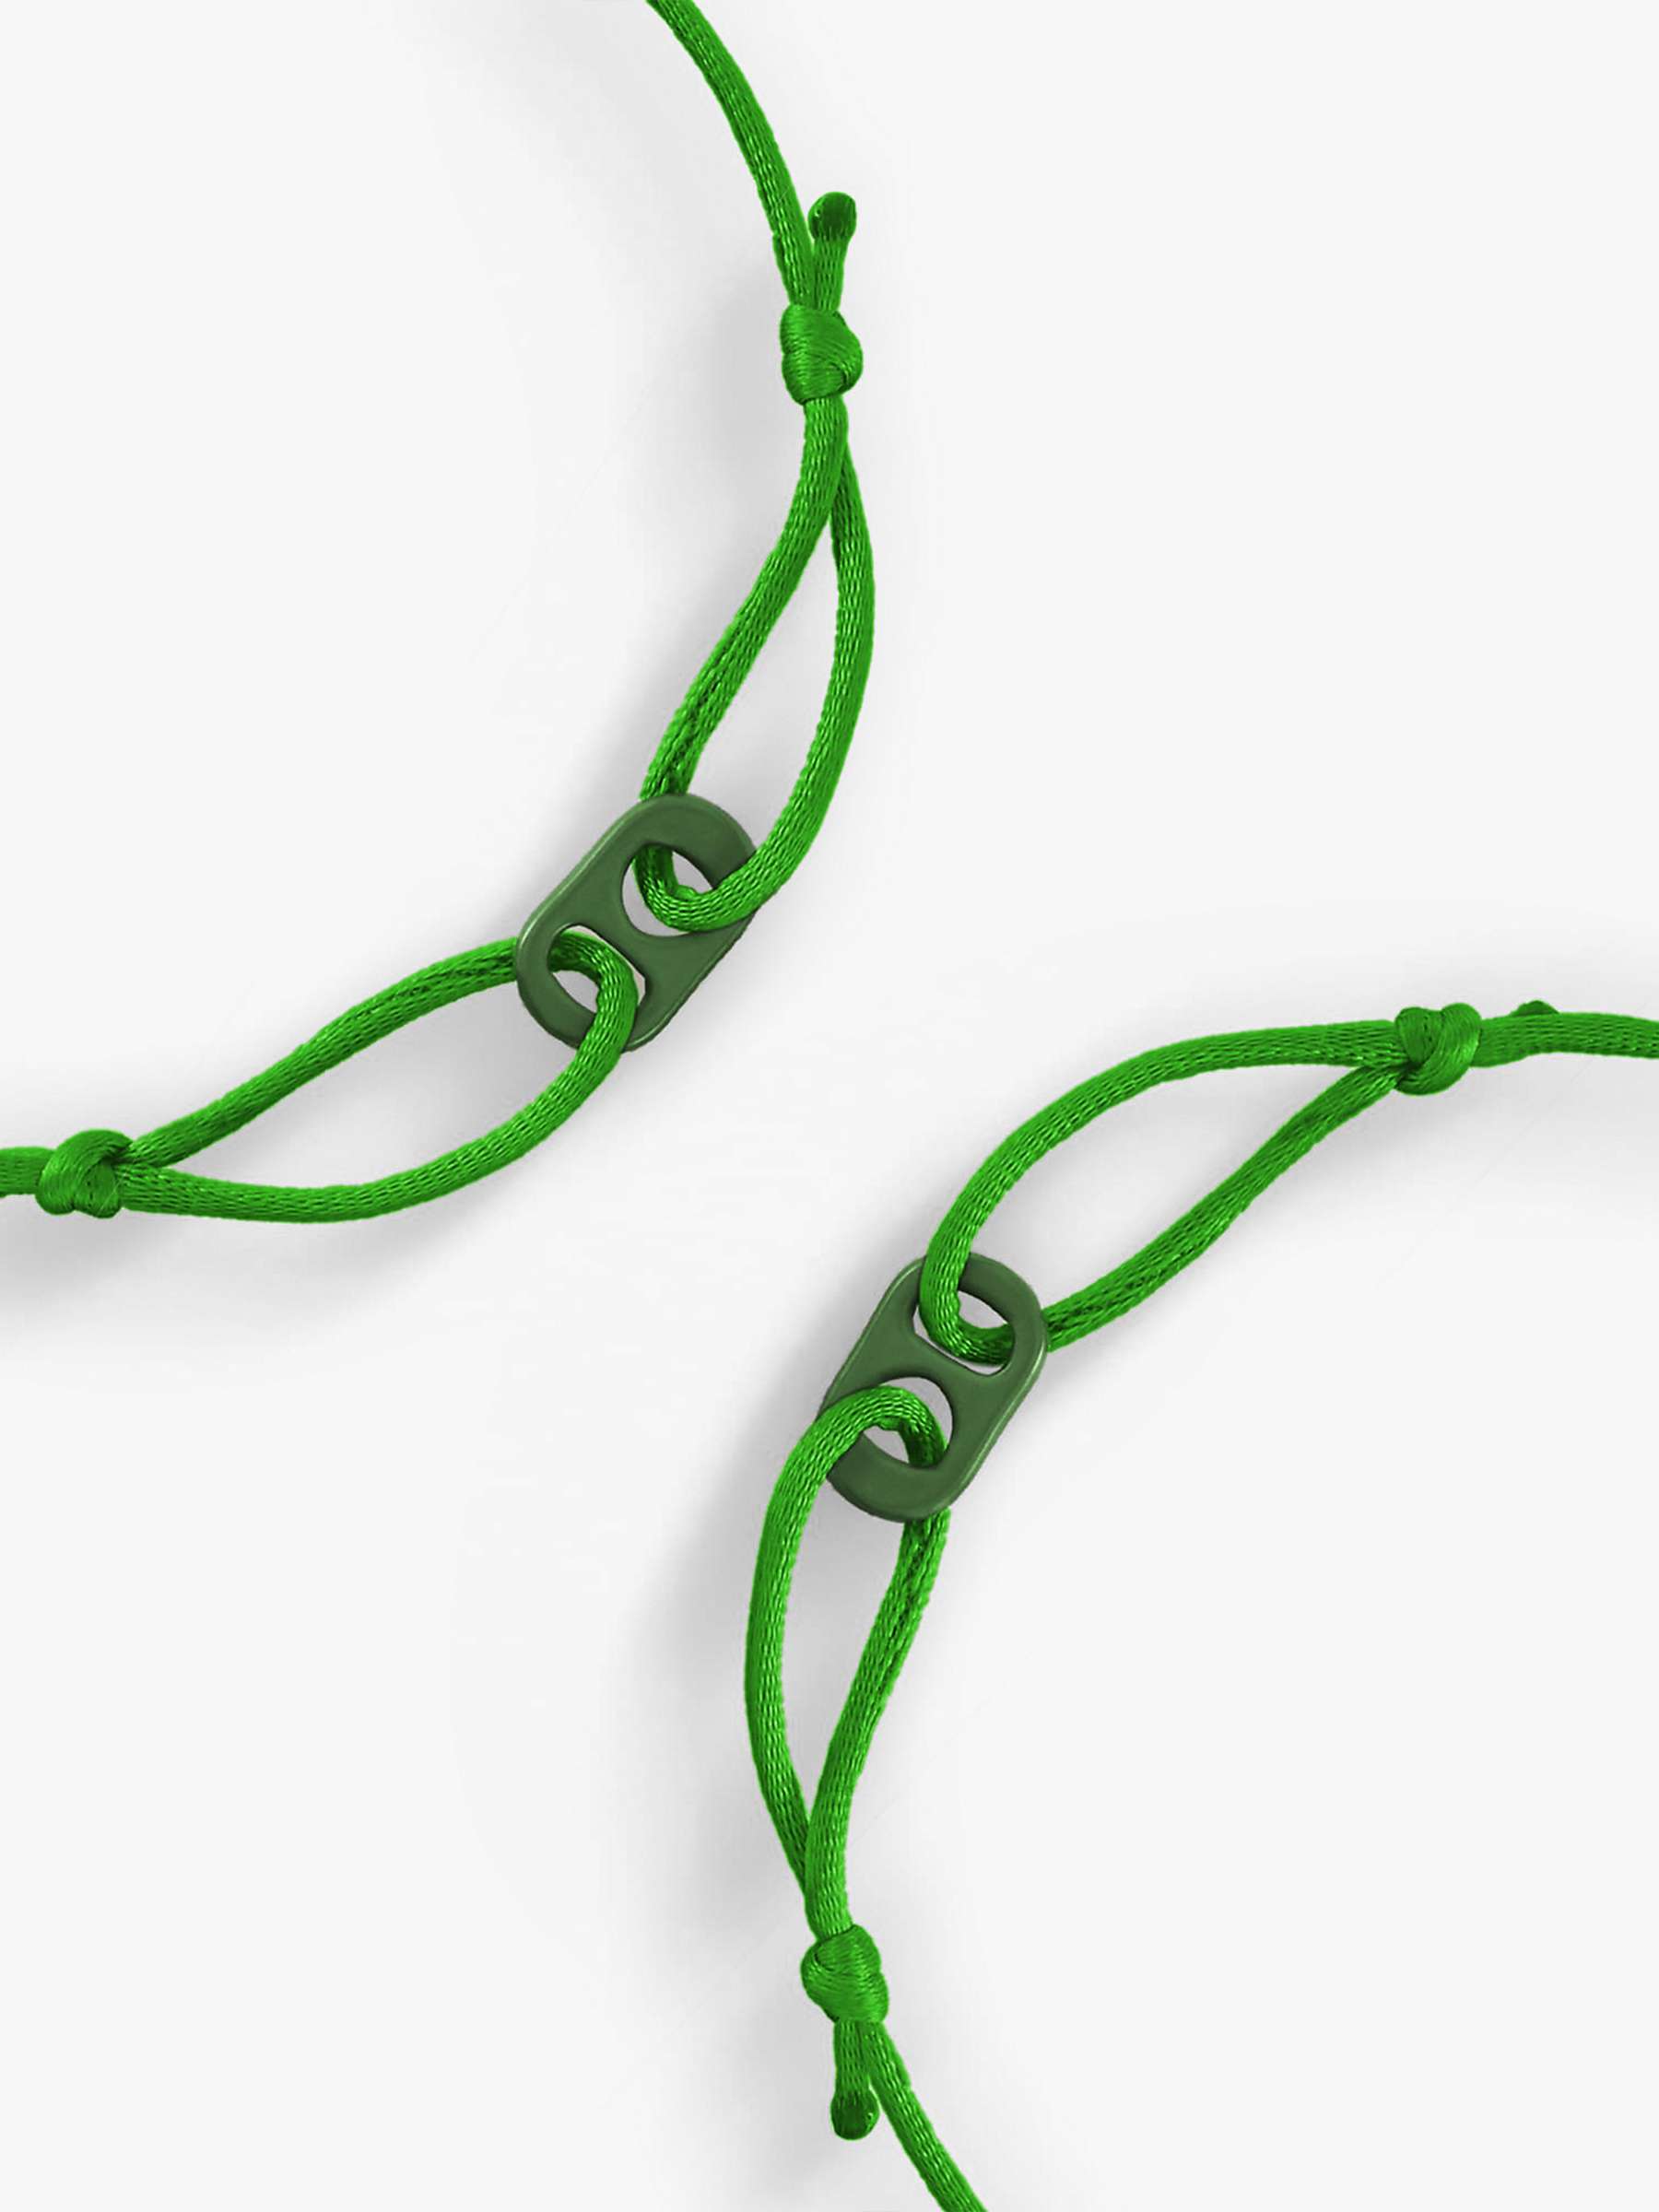 Buy #TOGETHERBAND UN Goal 13 - Climate Action Recycled Plastic Mini Bracelet, Pack of 2, Dark Green Online at johnlewis.com